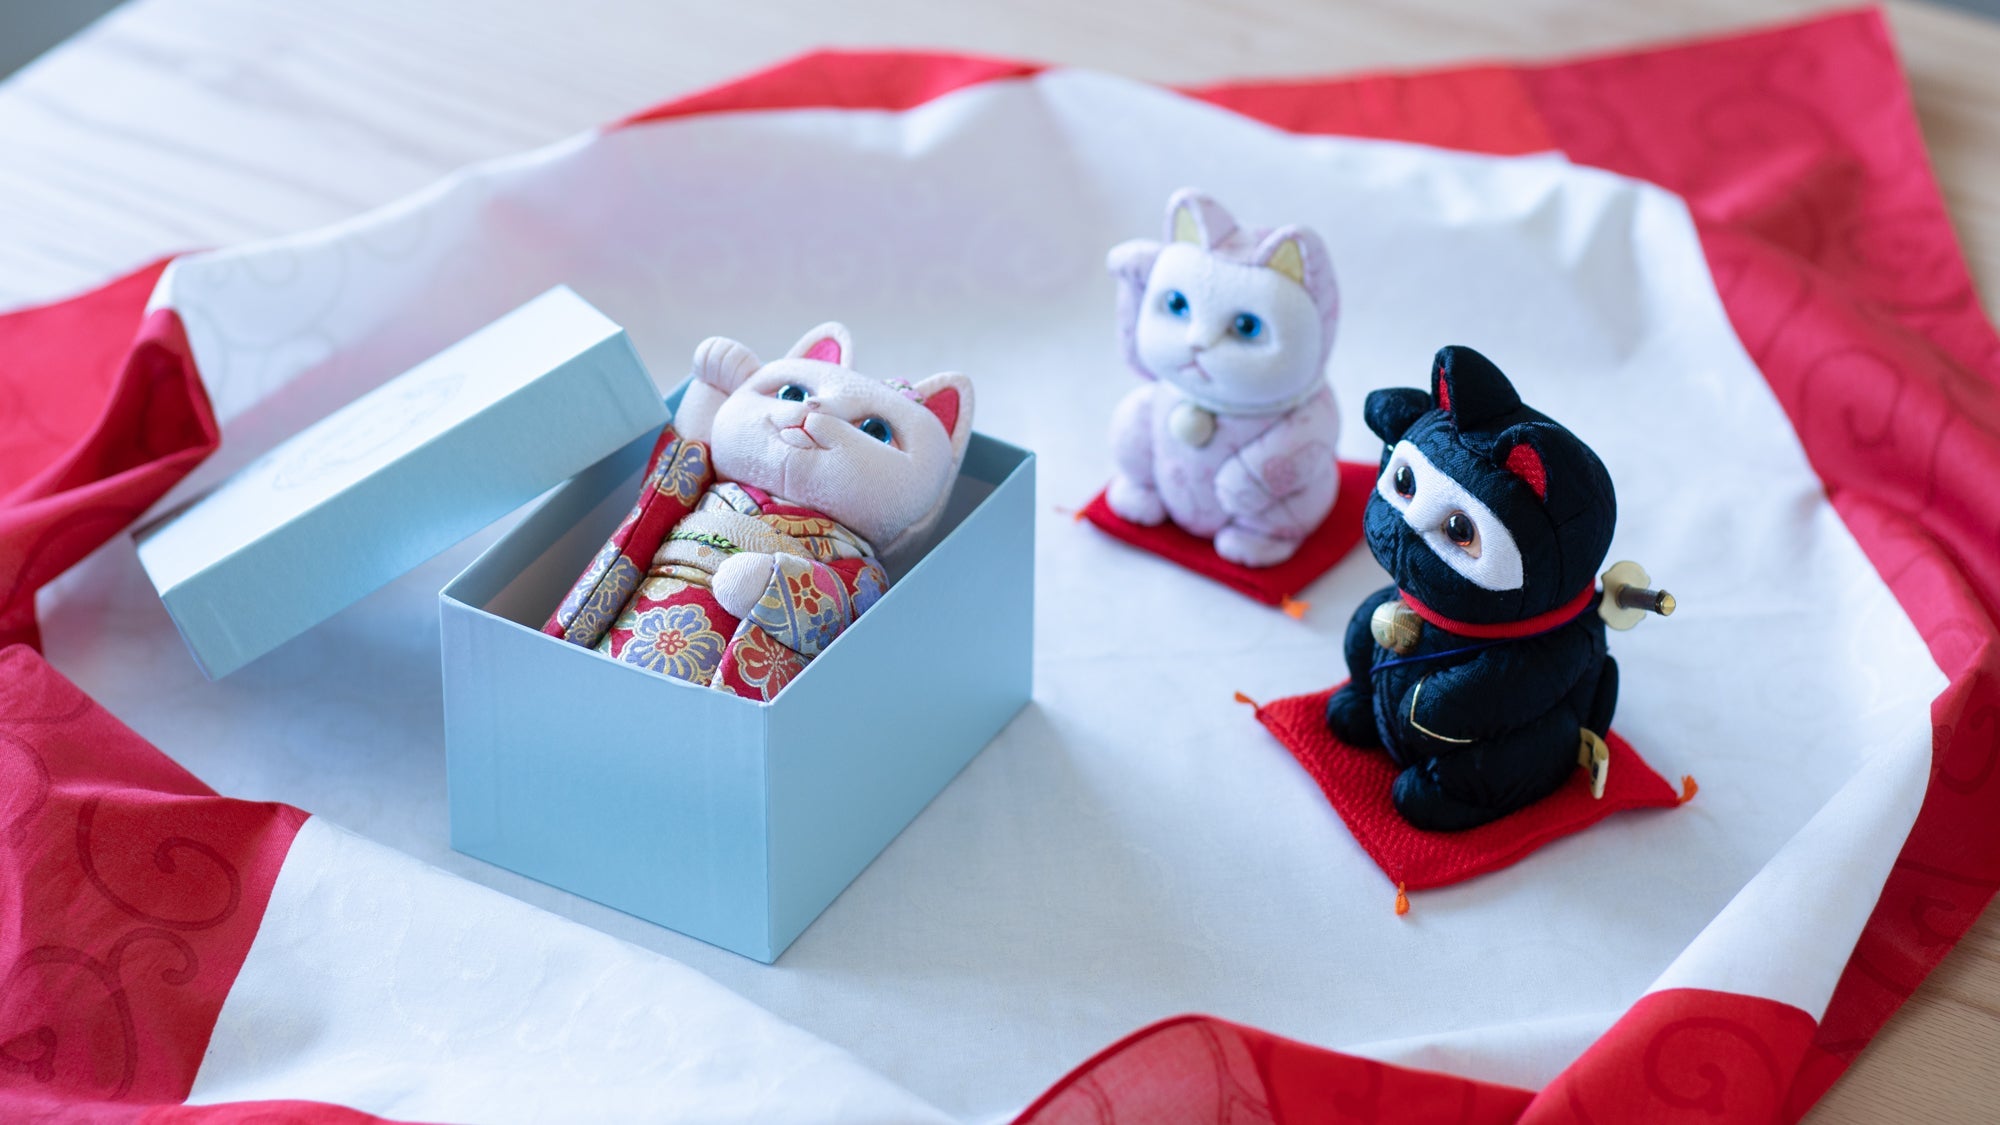 Great as a Gift! Lucky Cats with Kimekomi Doll Craftsmanship